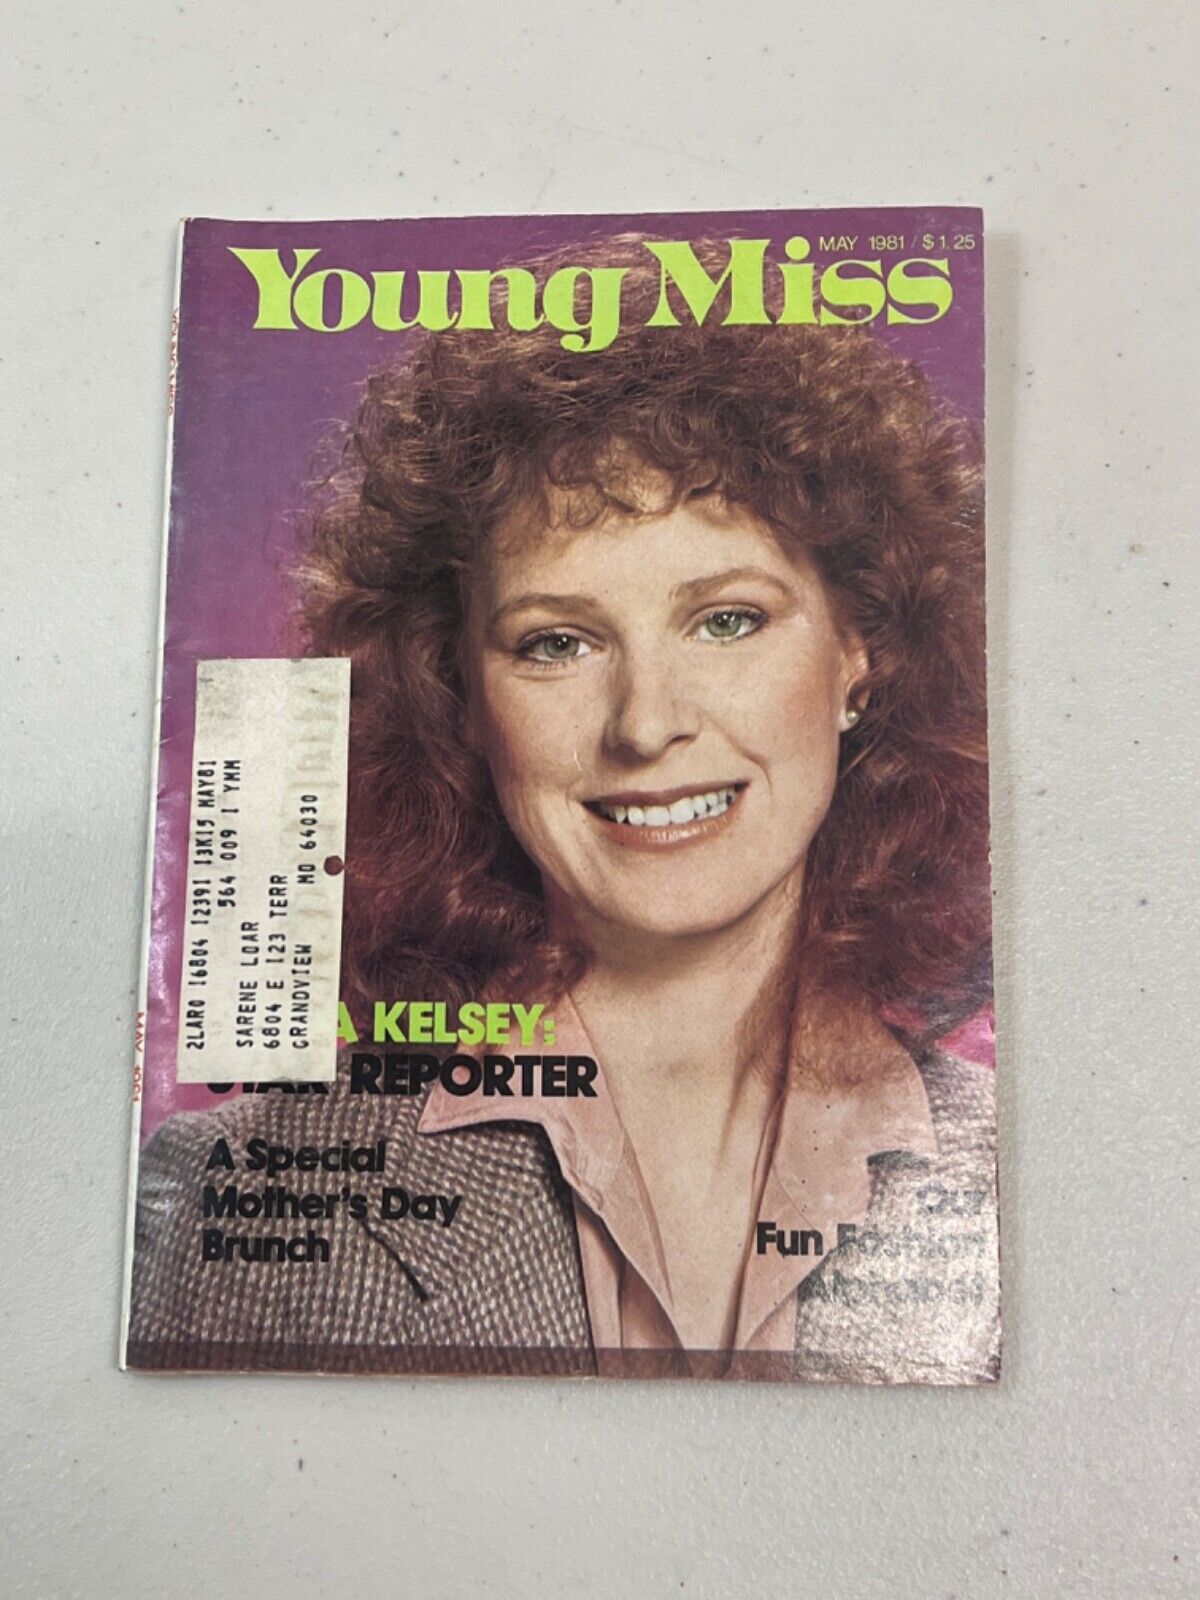 Young Miss May 1981 